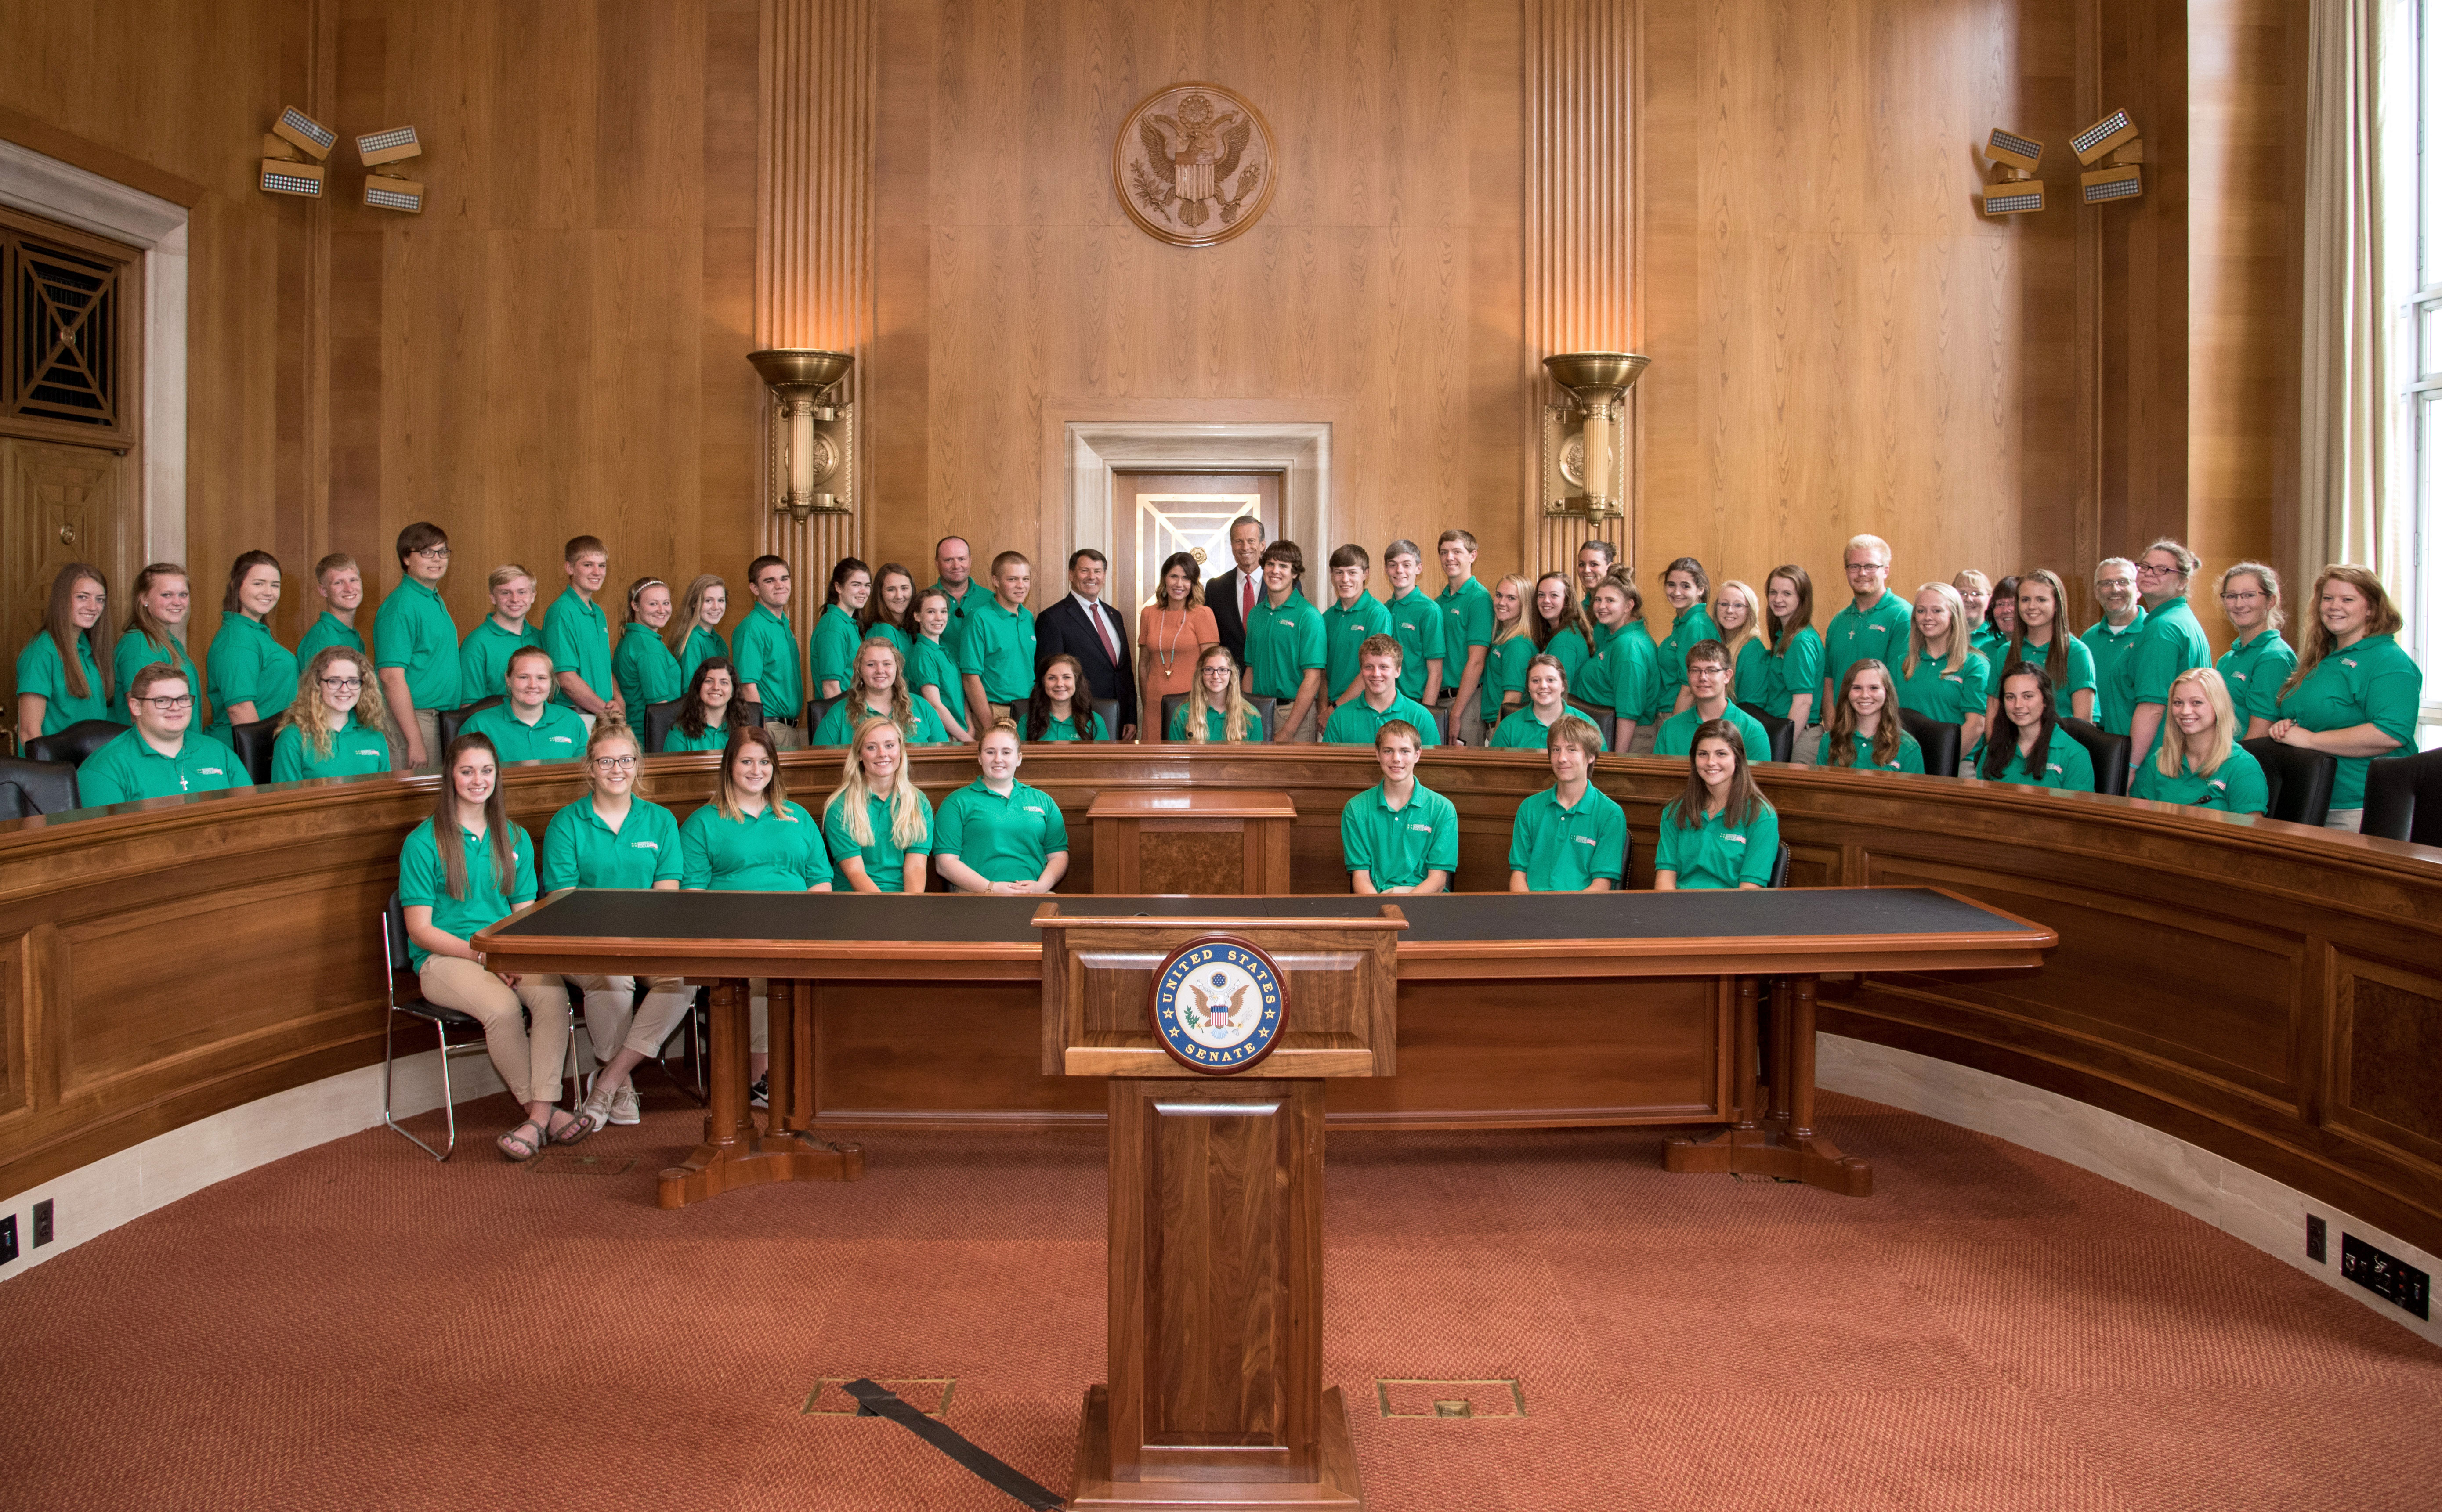 large group of 4-H youth posing for a photo with U.S. government officials inside a governmental chamber